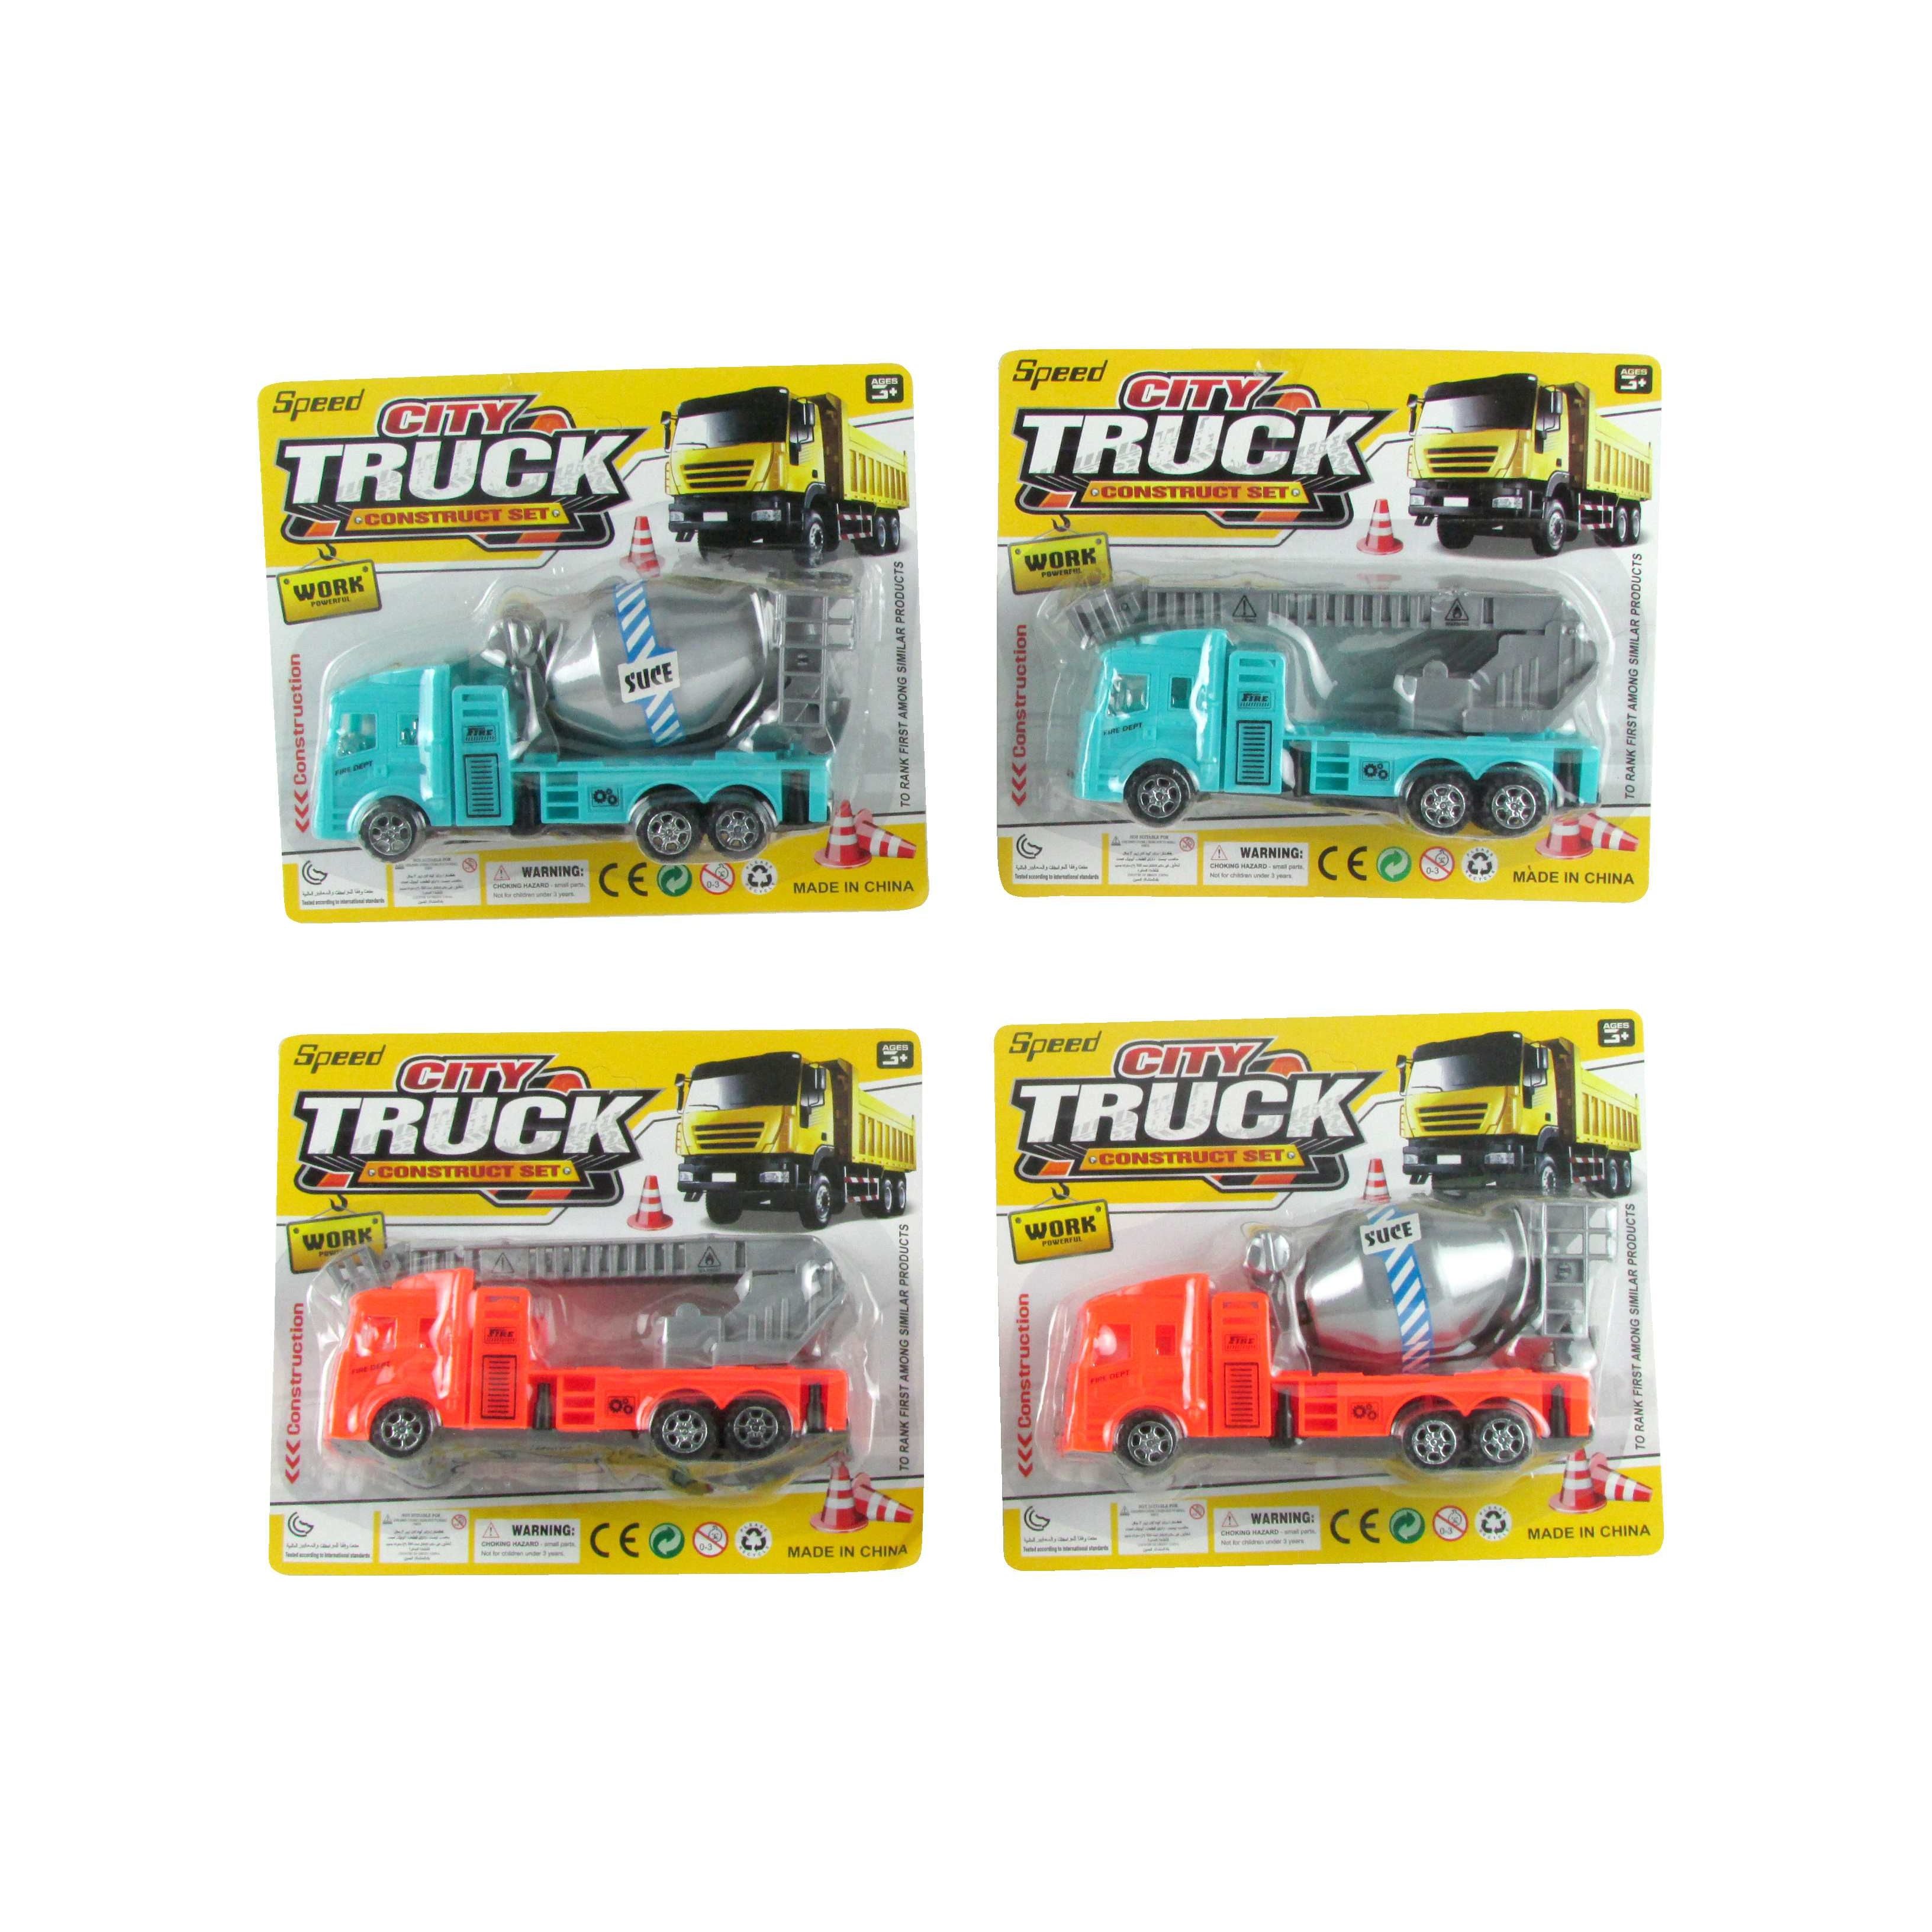 Construction Truck Toy - Dollars and Sense